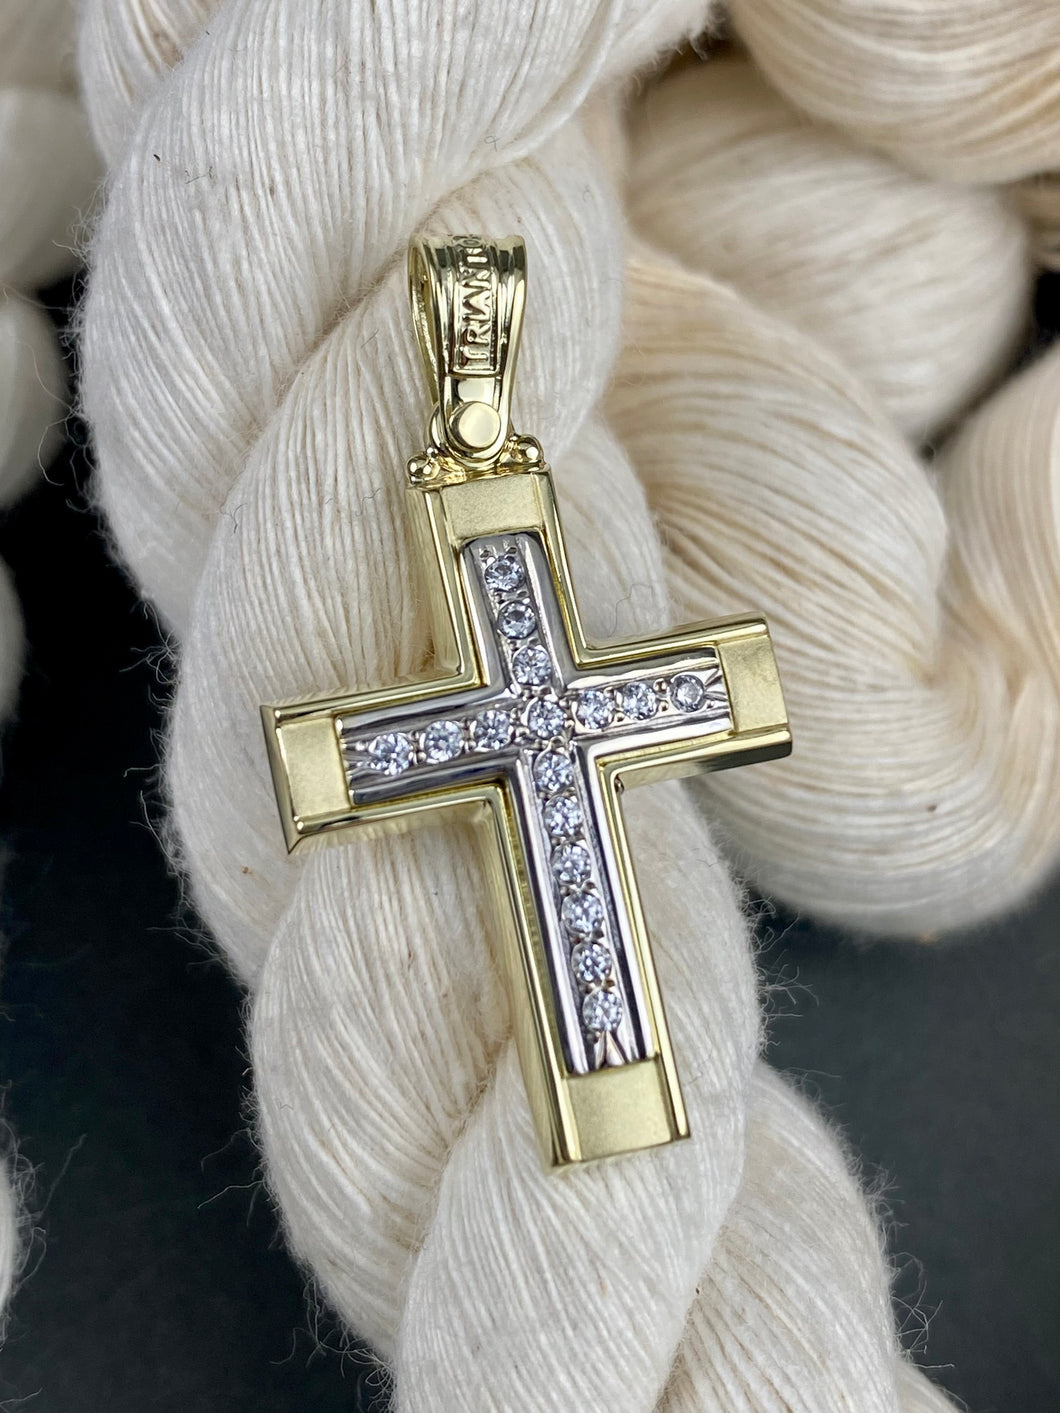 Triantos 14k 2 Tone White and Yellow Gold Cross Polished  and Brushed with Precious Stones 4.0g 222612